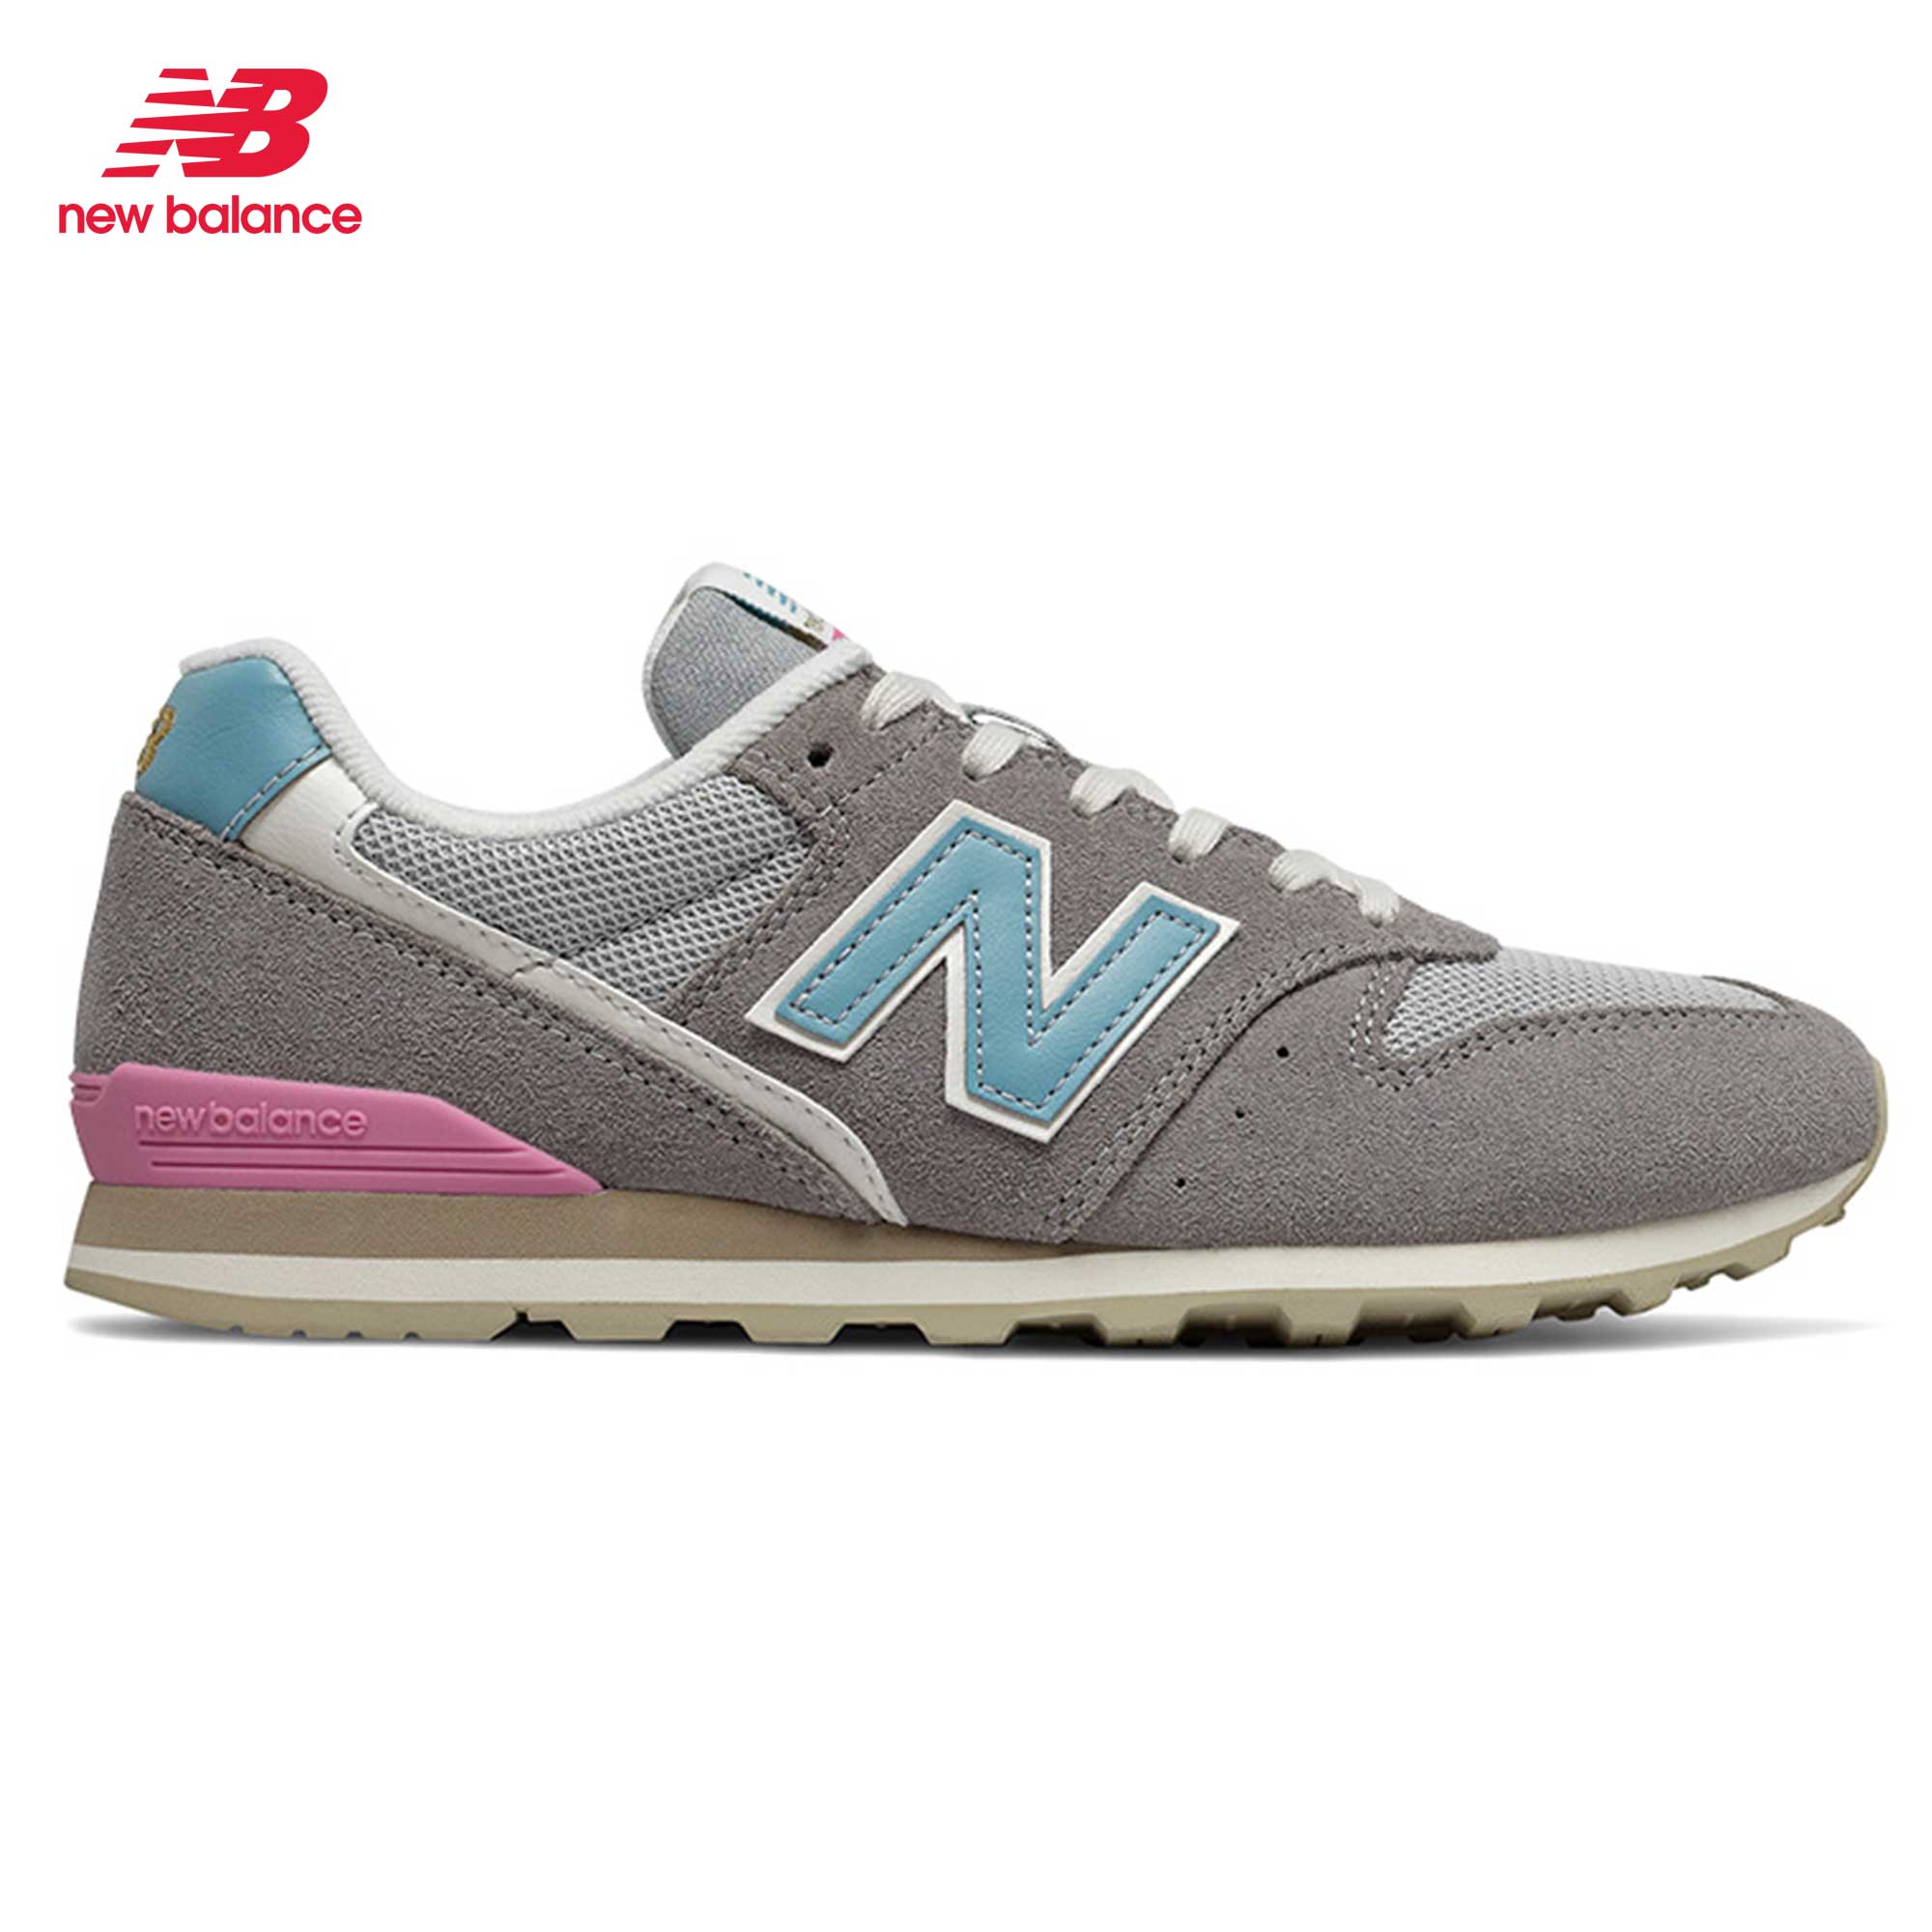 New Balance 996 Lifestyle Shoes for 